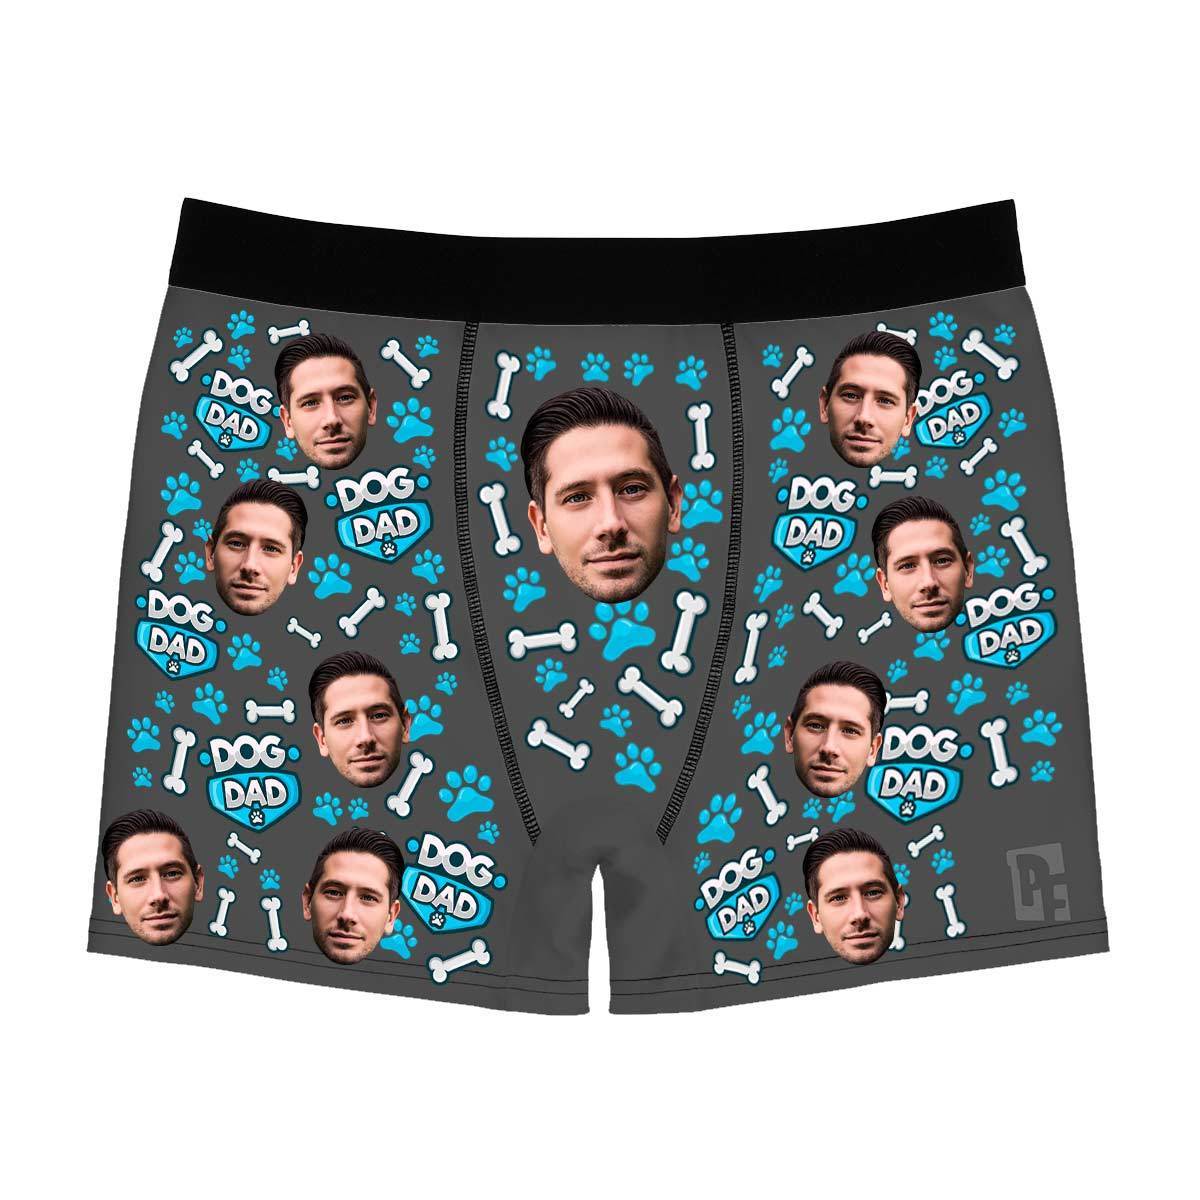 Dark Dog dad men's boxer briefs personalized with photo printed on them